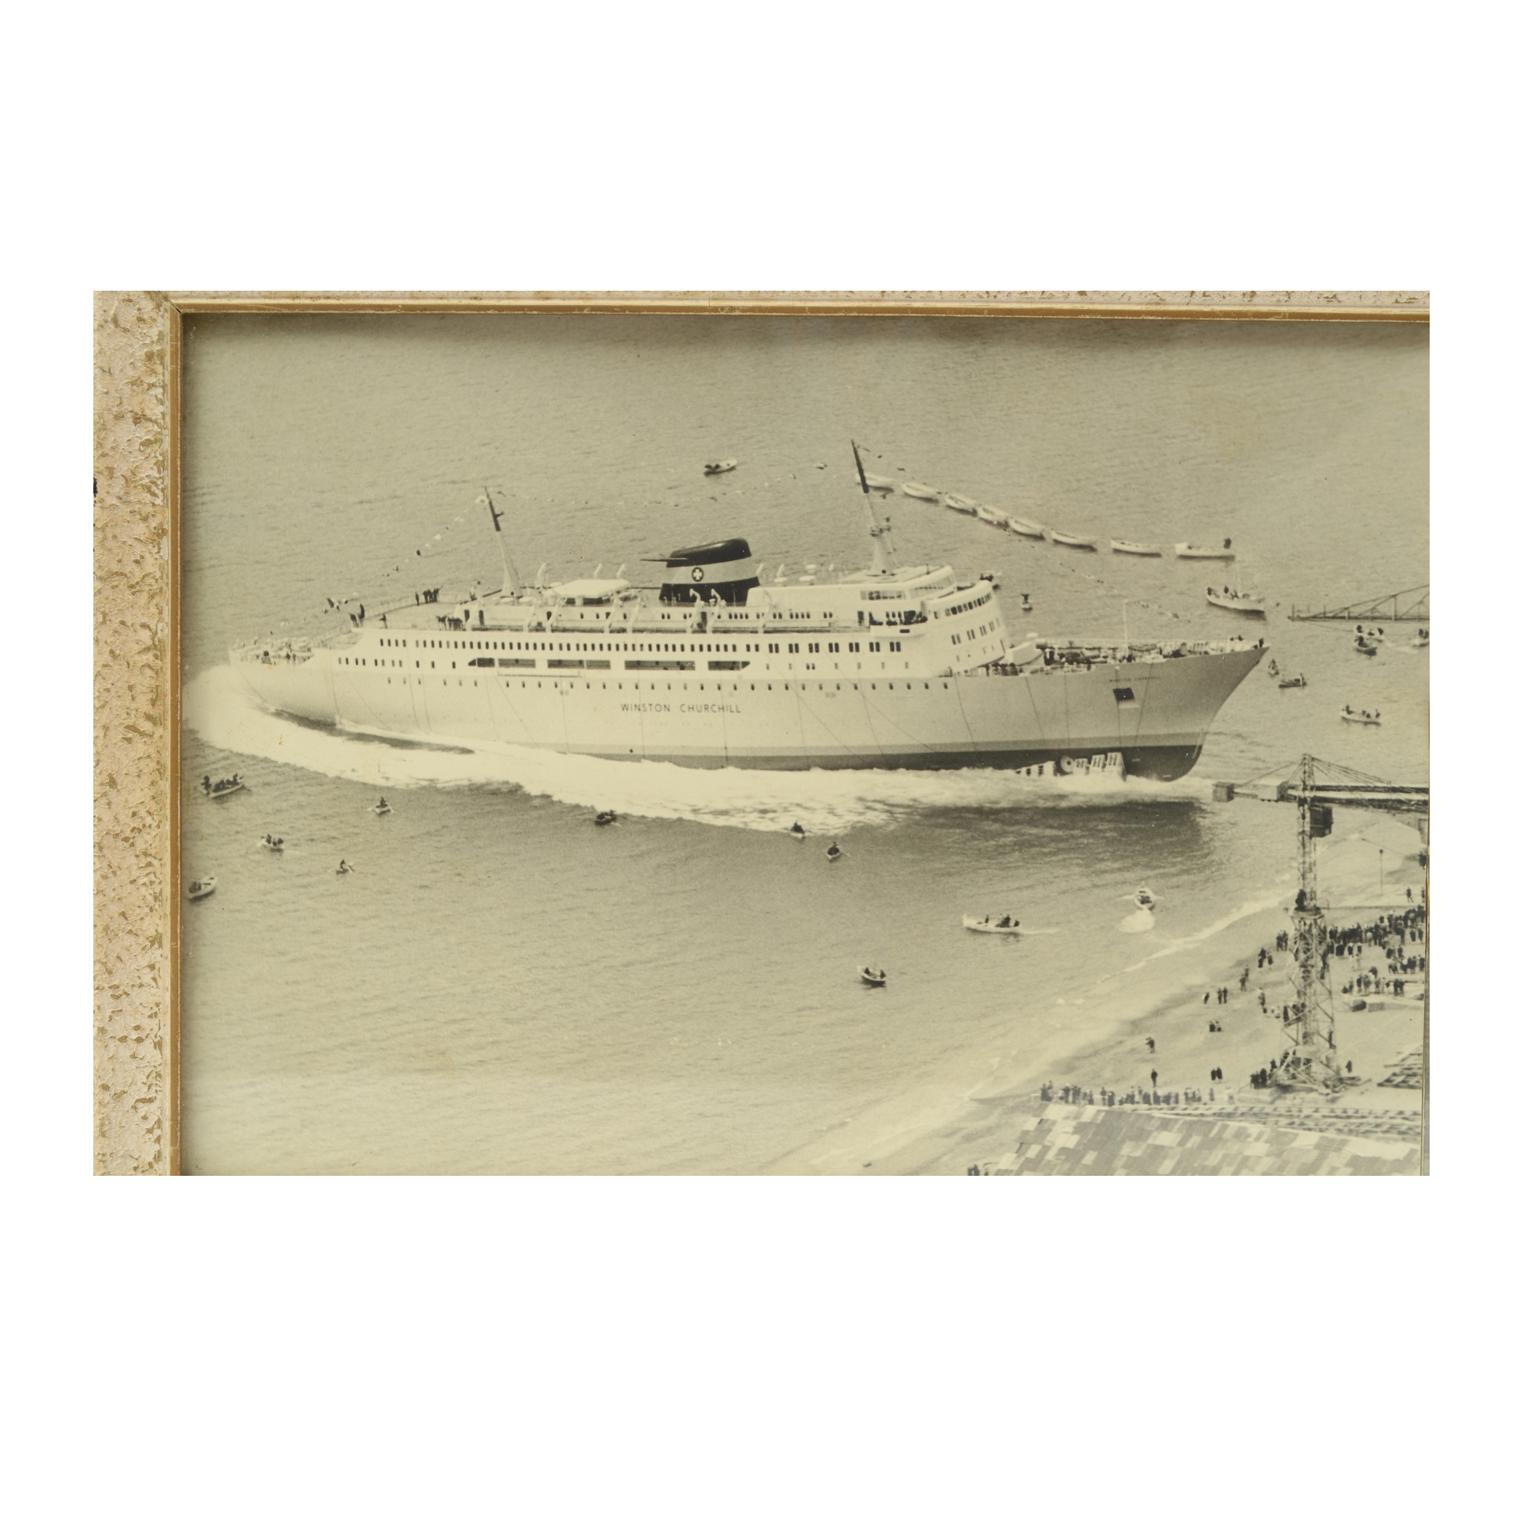 Rectangular frame with original pictures depicting four ships launching in Riva Trigoso shipyard: Winston Churchill ferry (25th April 1967); Gatun cargo (16th November 1957); Giorgio Parodi cargo (25th November 1956) and another ship with unknown